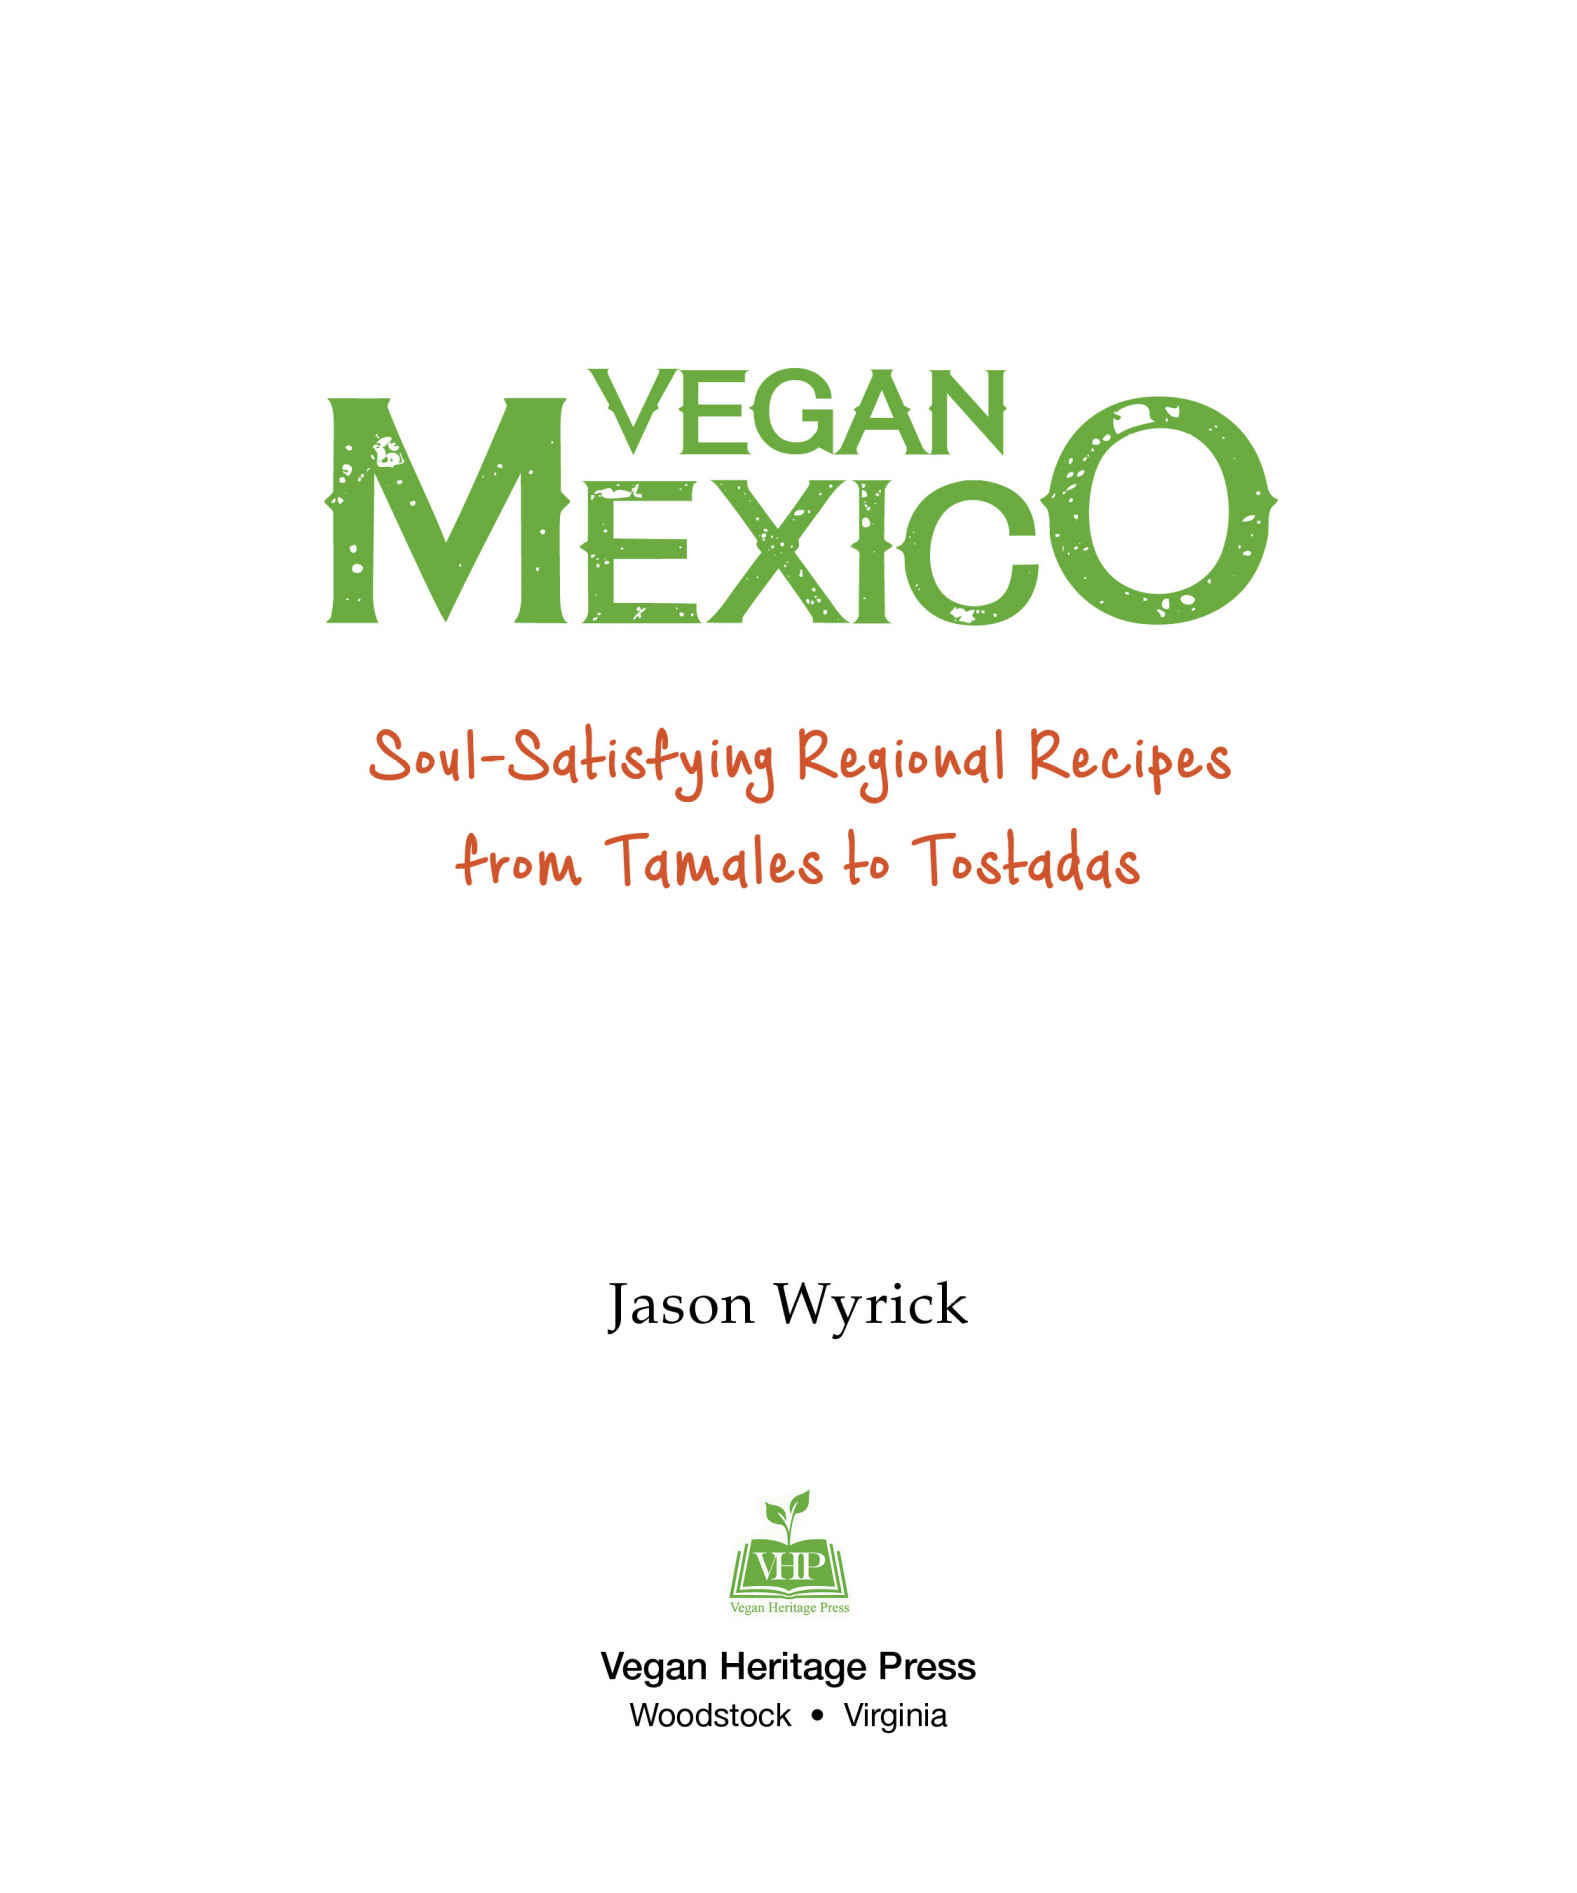 Vegan Mexico Soul-Satisfying Regional Favorites from Tamales to Tostadas by - photo 3